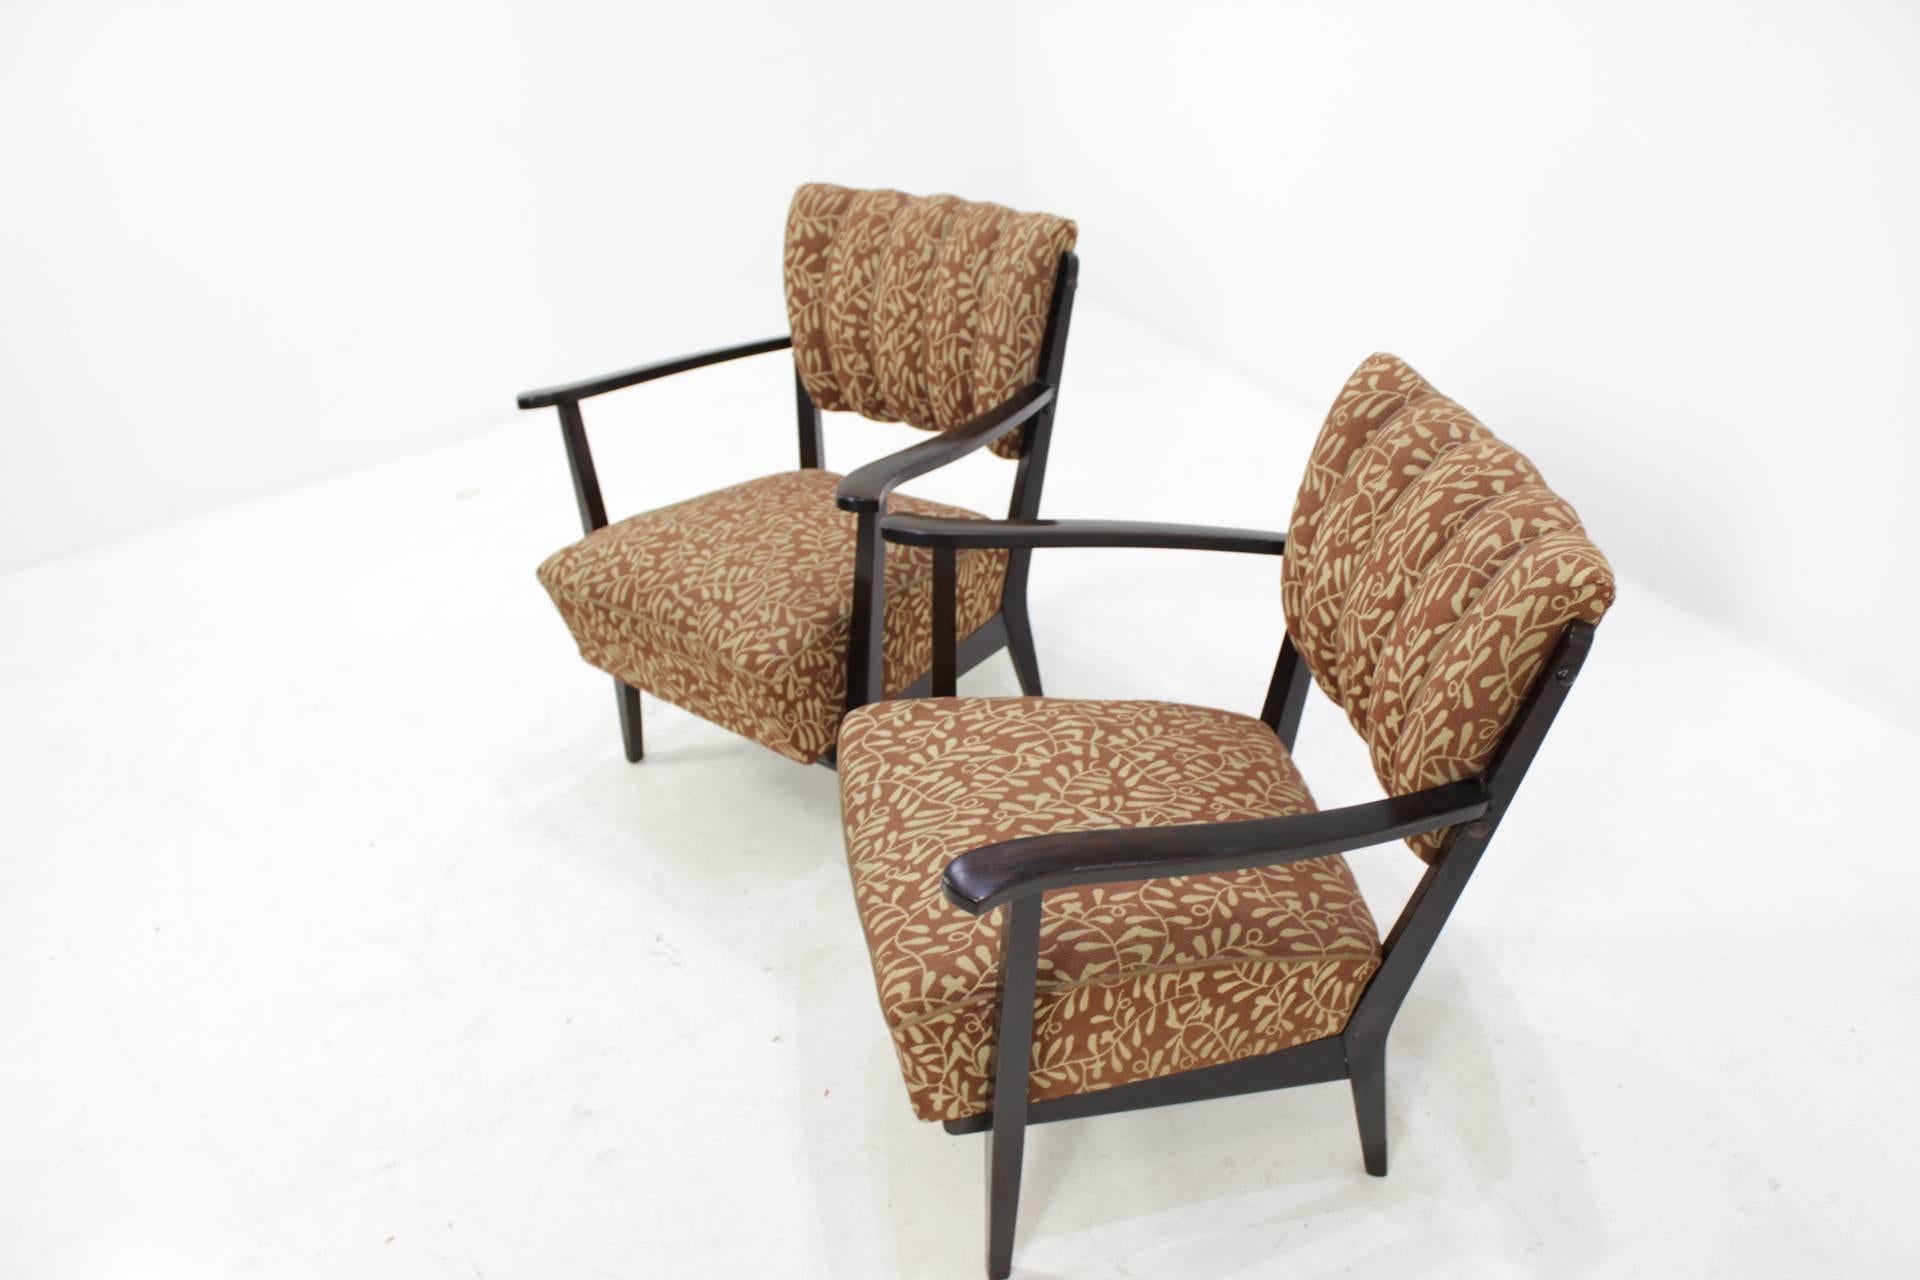 These chairs are in good original condition included fabric upholstery. Minor signs of wear due to age.